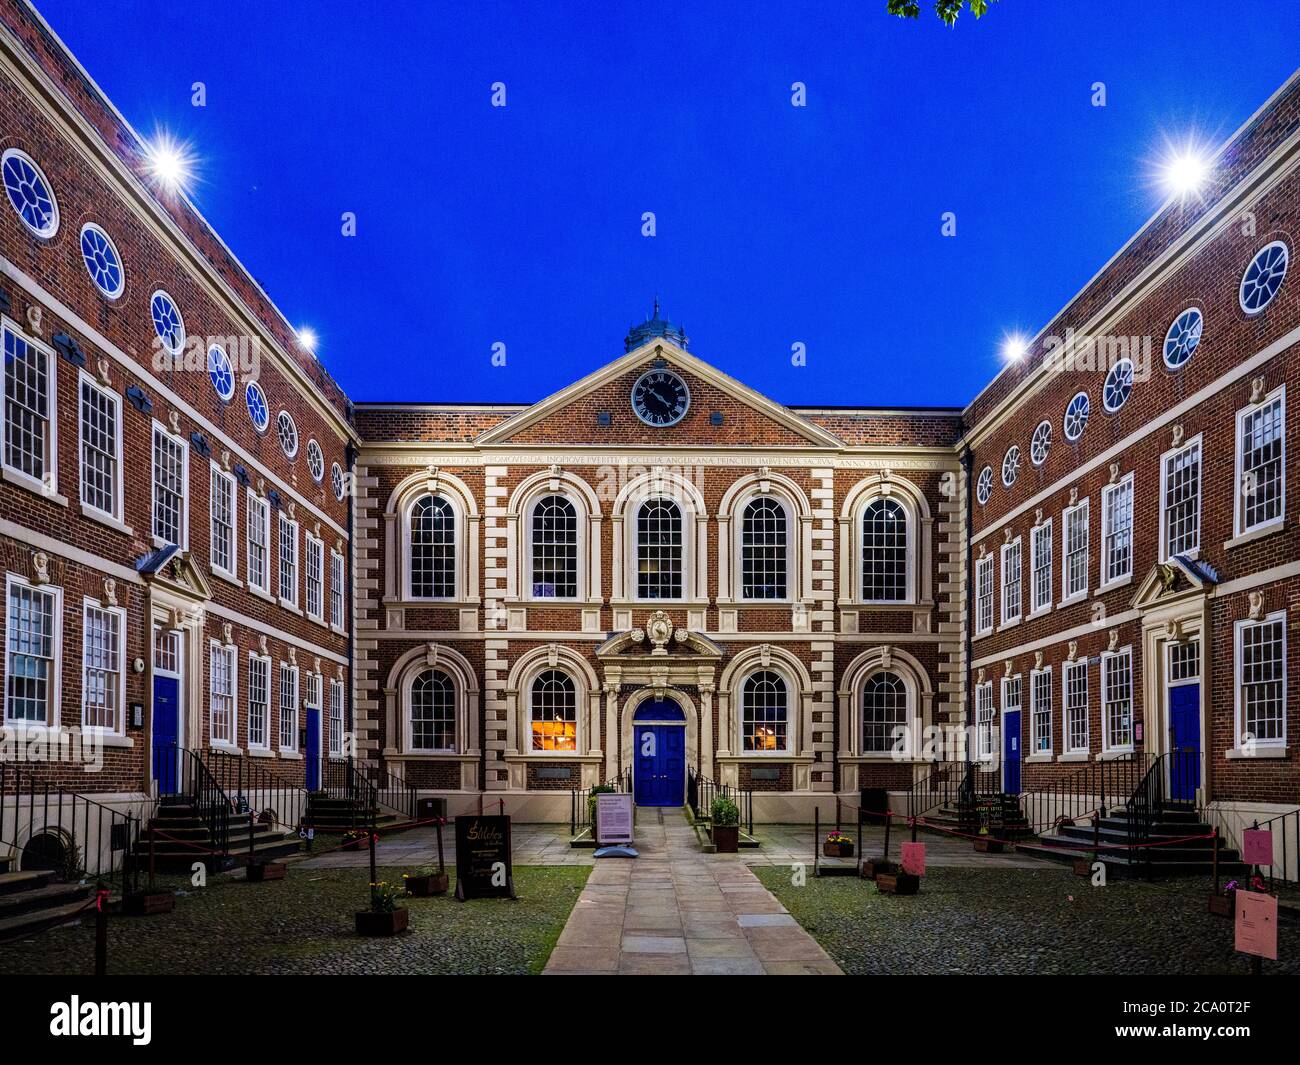 Bluecoat Liverpool - Bluecoat Arts Centre - Grade I listed, Queen Anne style. Oldest surviving building in central Liverpool, England, built 1716-17. Stock Photo